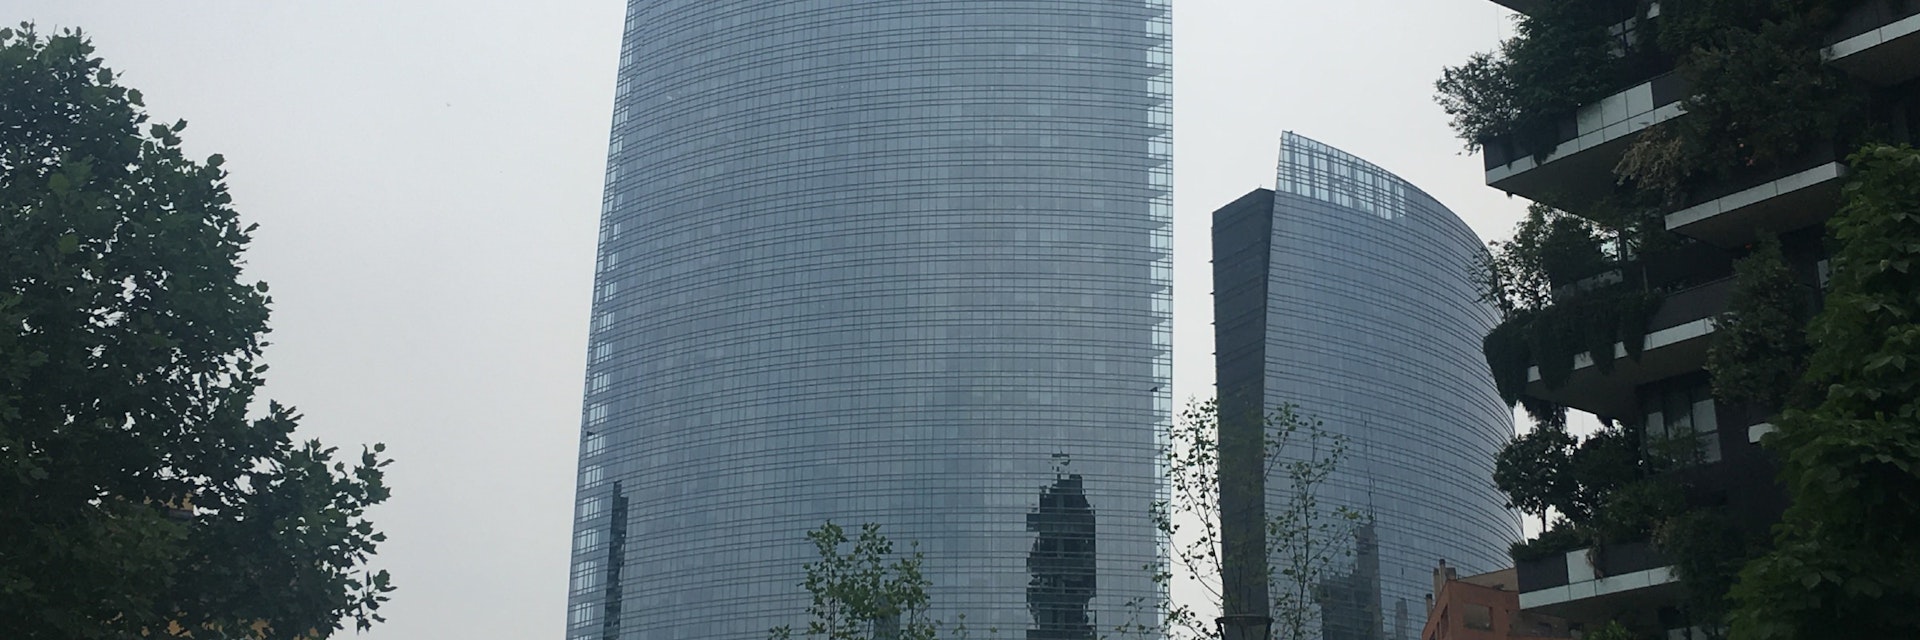 View of the UniCredit Tower